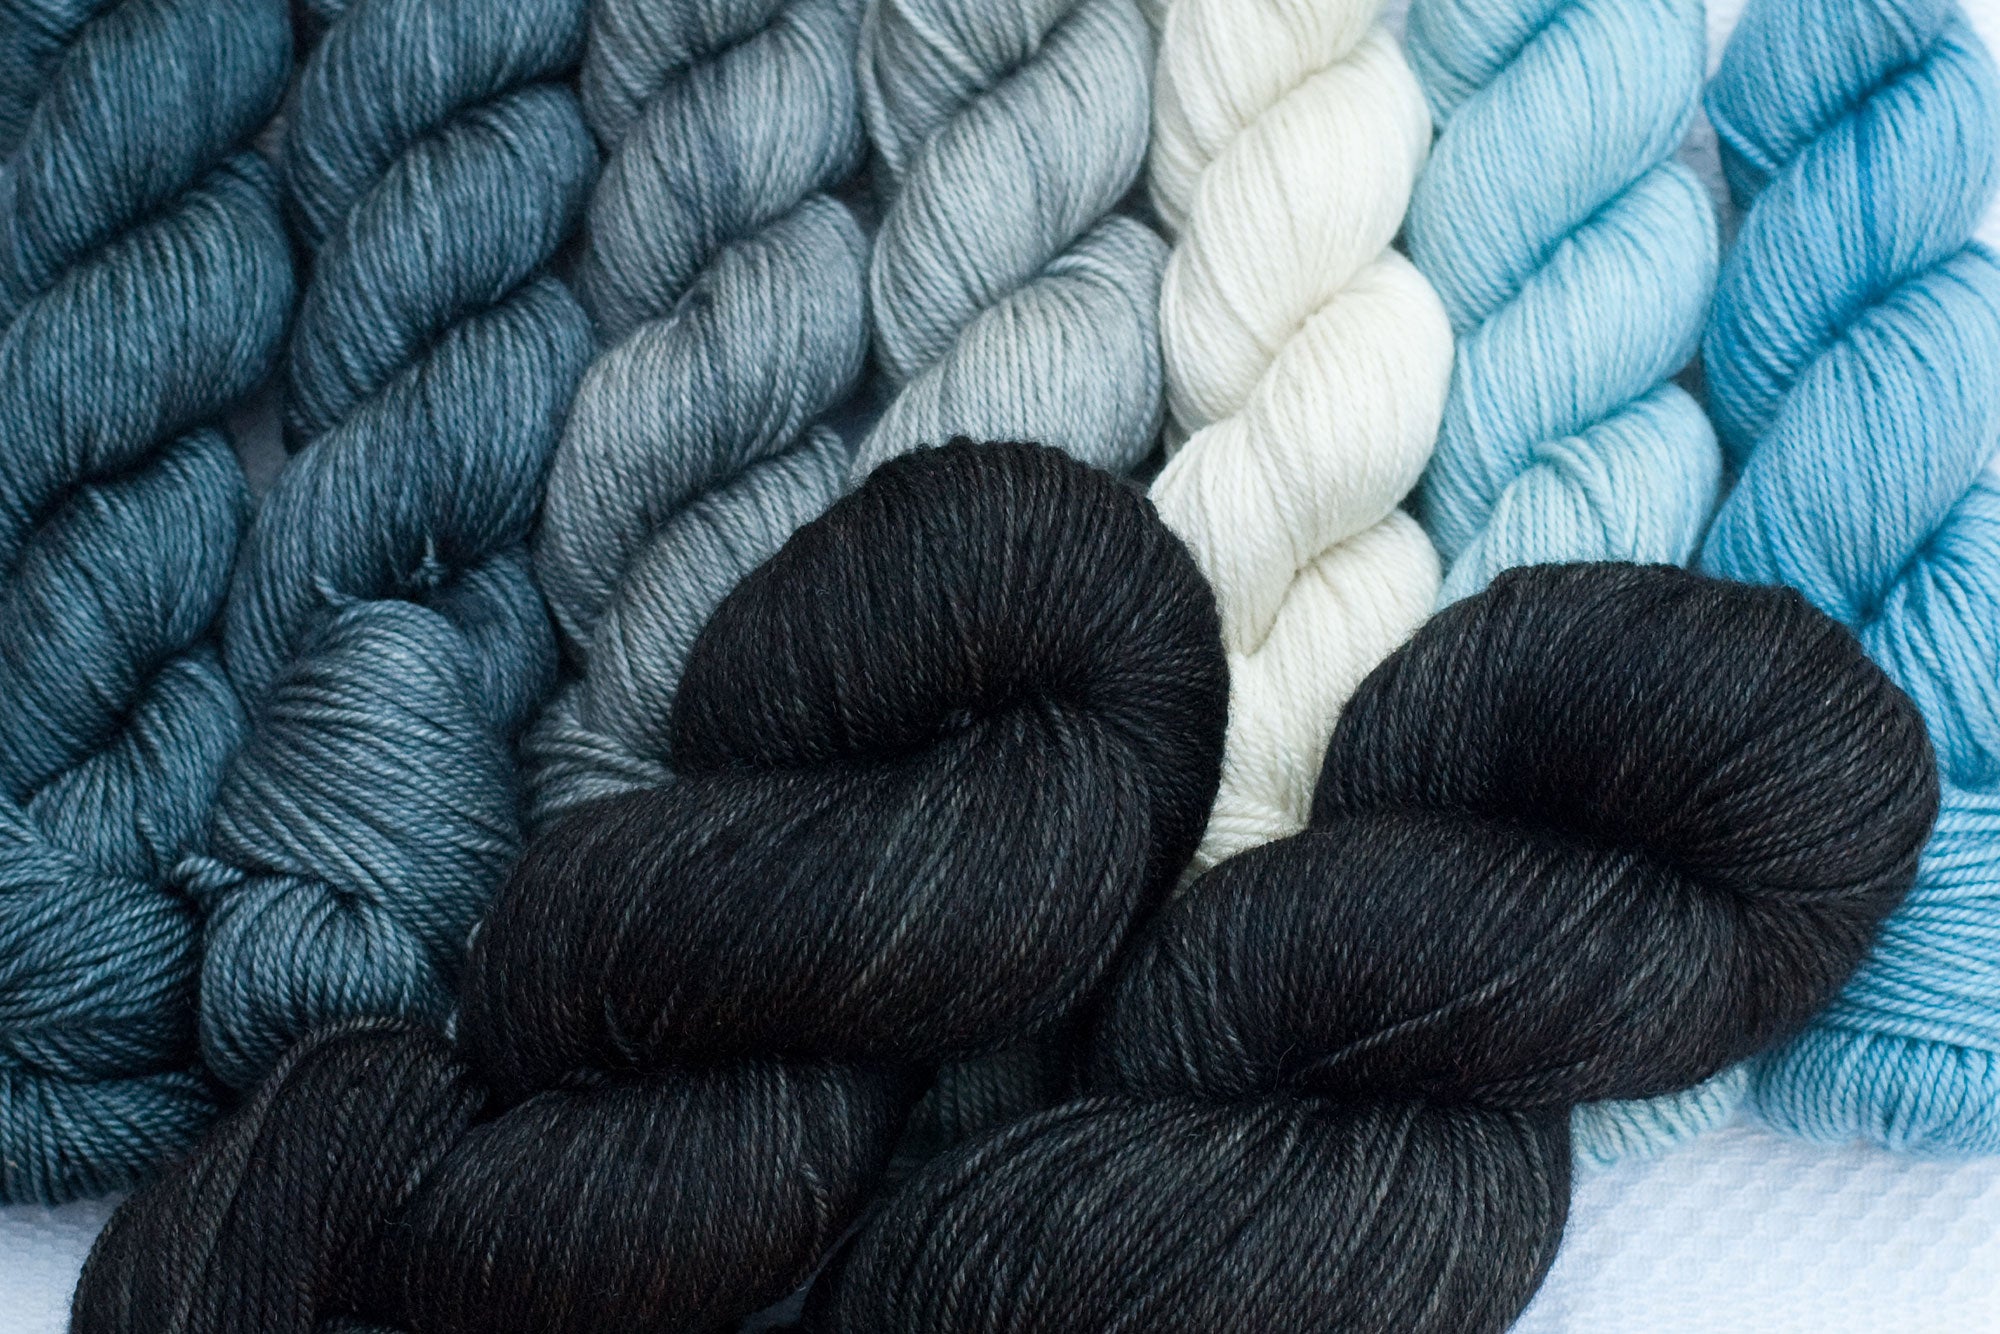 mountain musings mkal hand-dyed yarn set with black main colour and grey, white and blue contrast gradient set